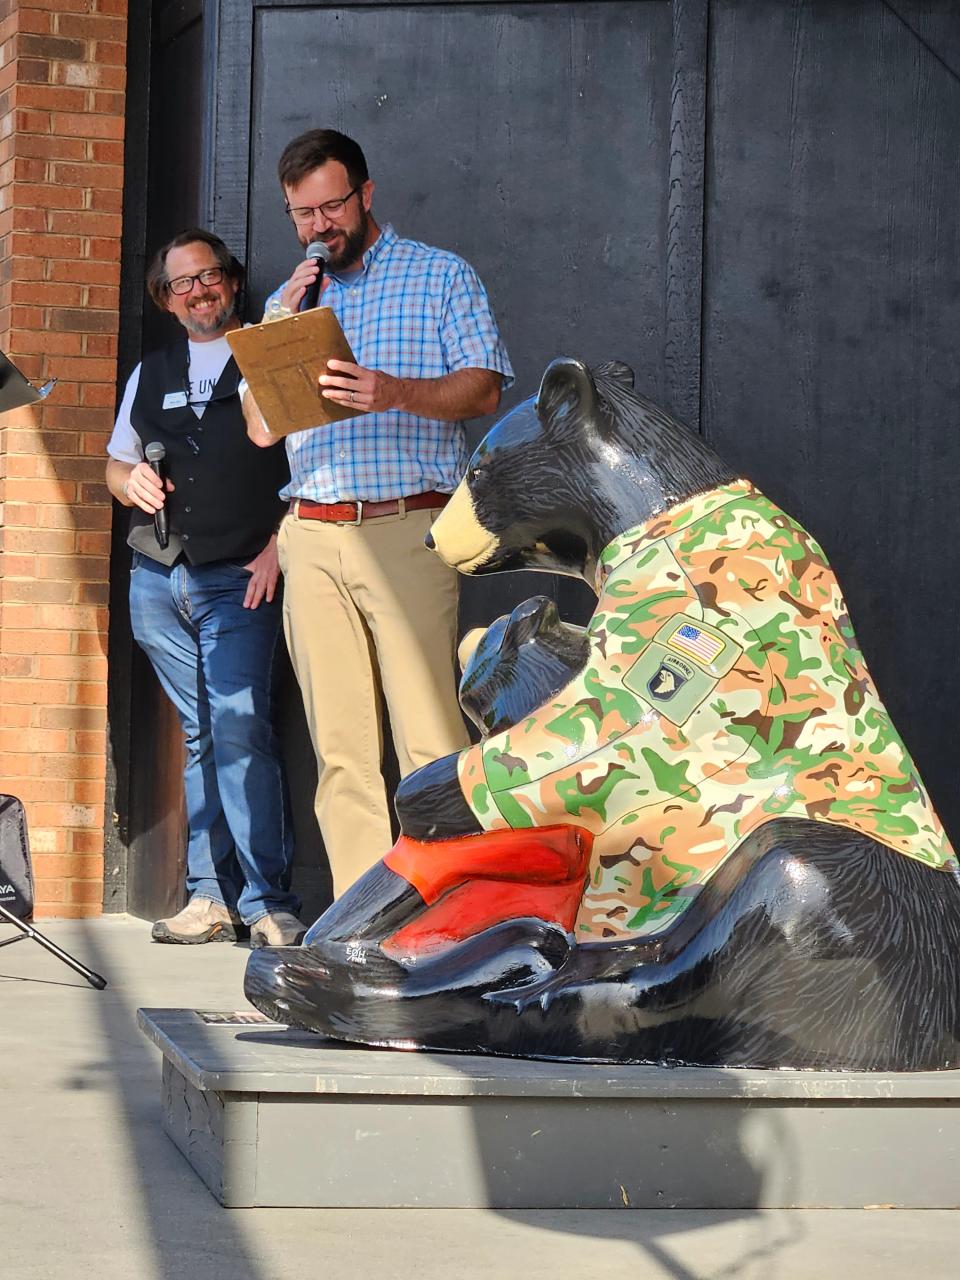 Community Development Director Lew Holloway, right, and emcee Bryan Byrd present the Homecoming Bear at the May 10 Bearfootin' Art Walk in Hendersonville.